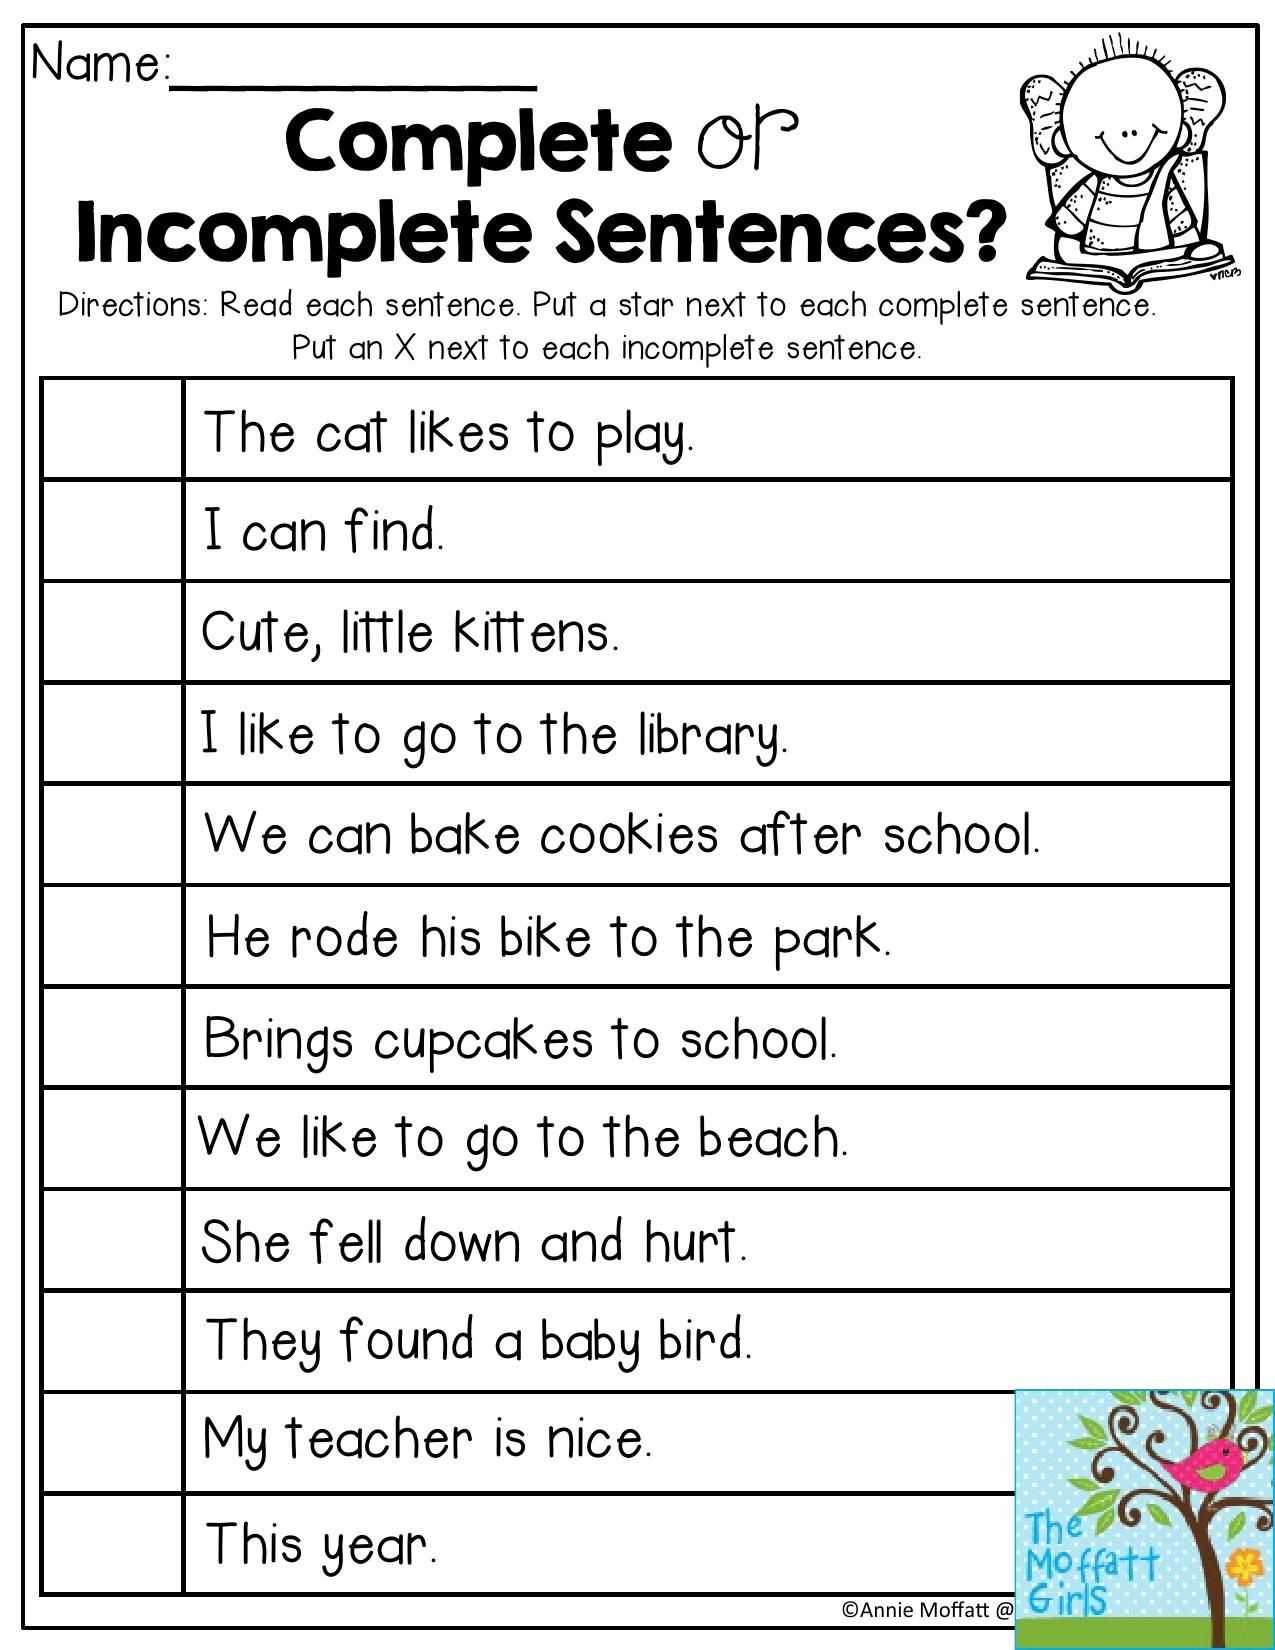 Simple Compound and Complex Sentences Worksheet Pdf with Answers Along with Plete or In Plete Sentences Read Each Sentence and Decide if